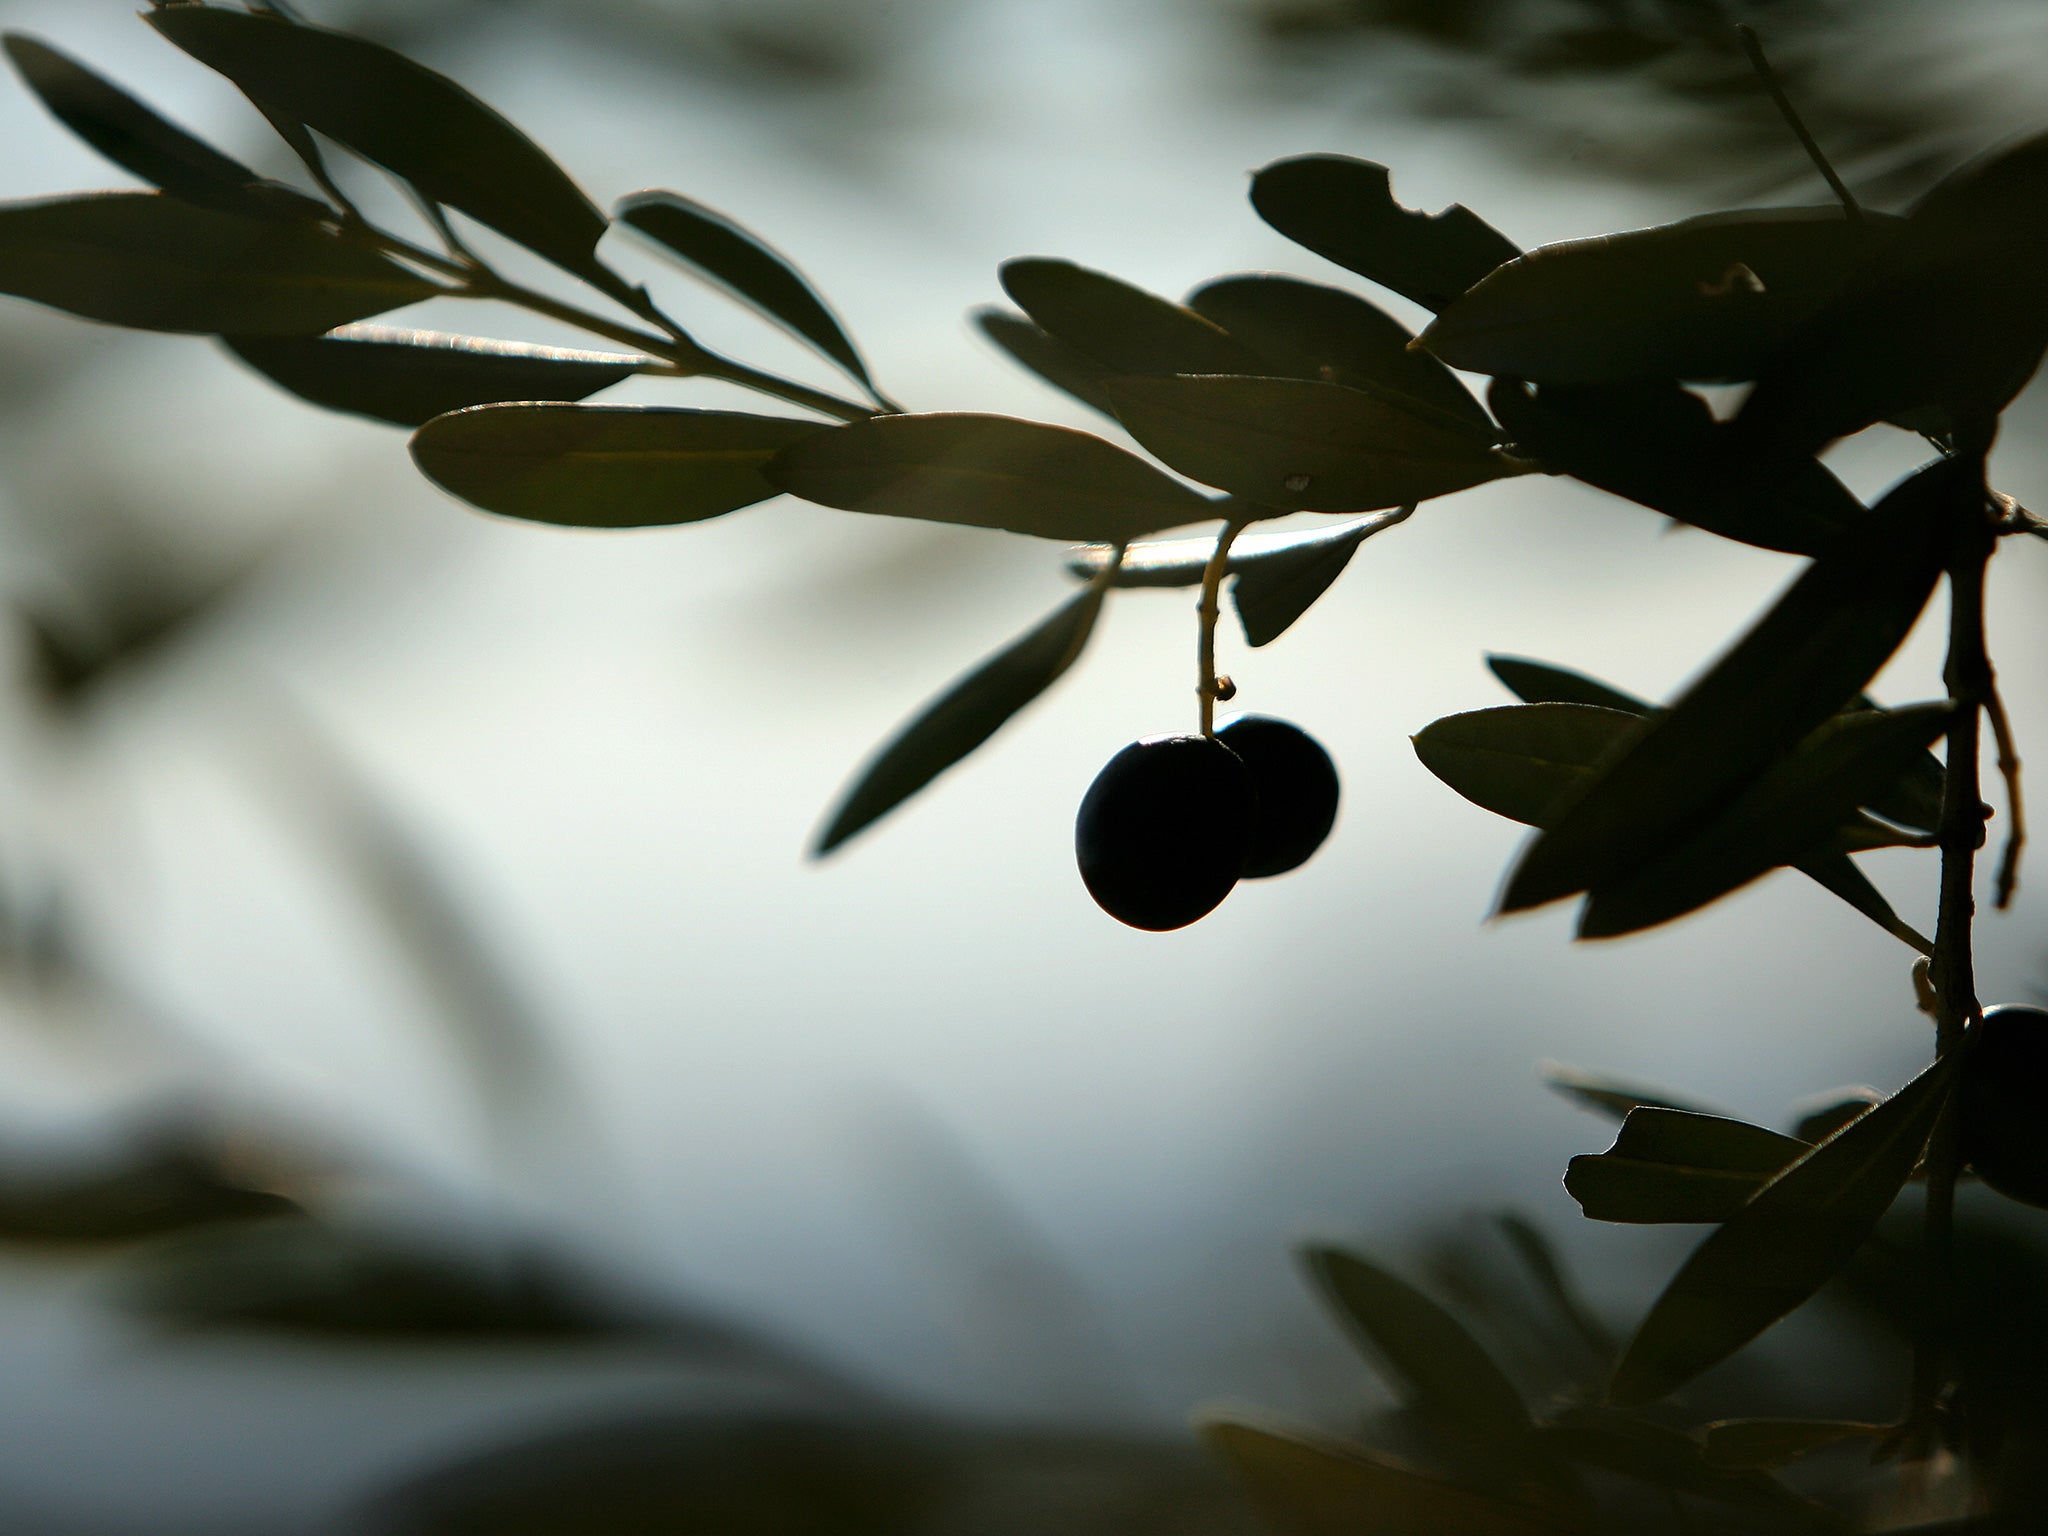 The rising cost of olives could push up oil prices (AFP/Getty)